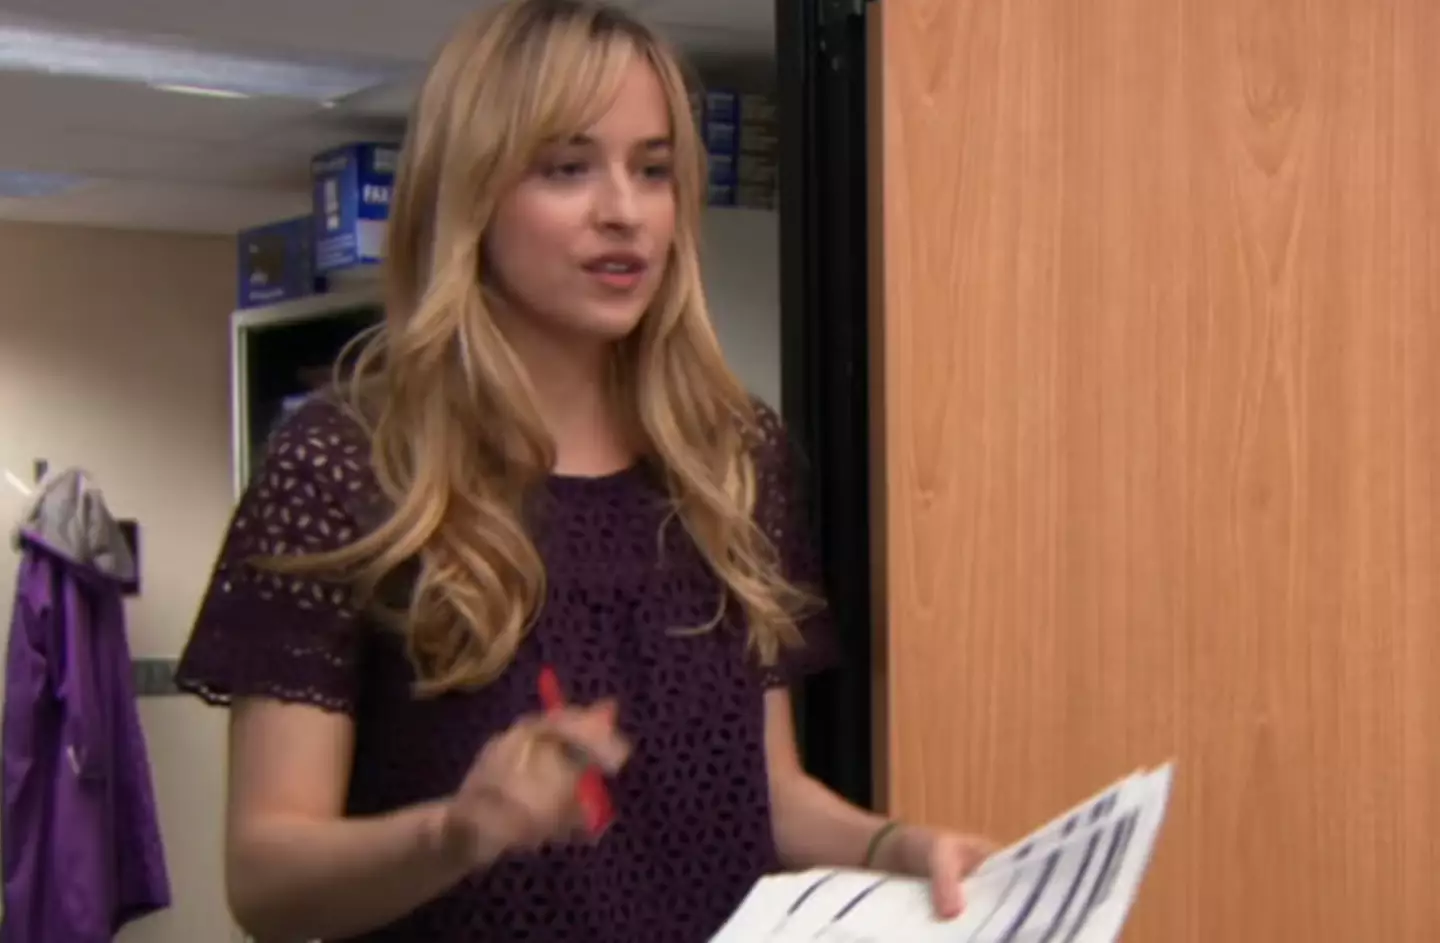 Johnson made a cameo in The Office.